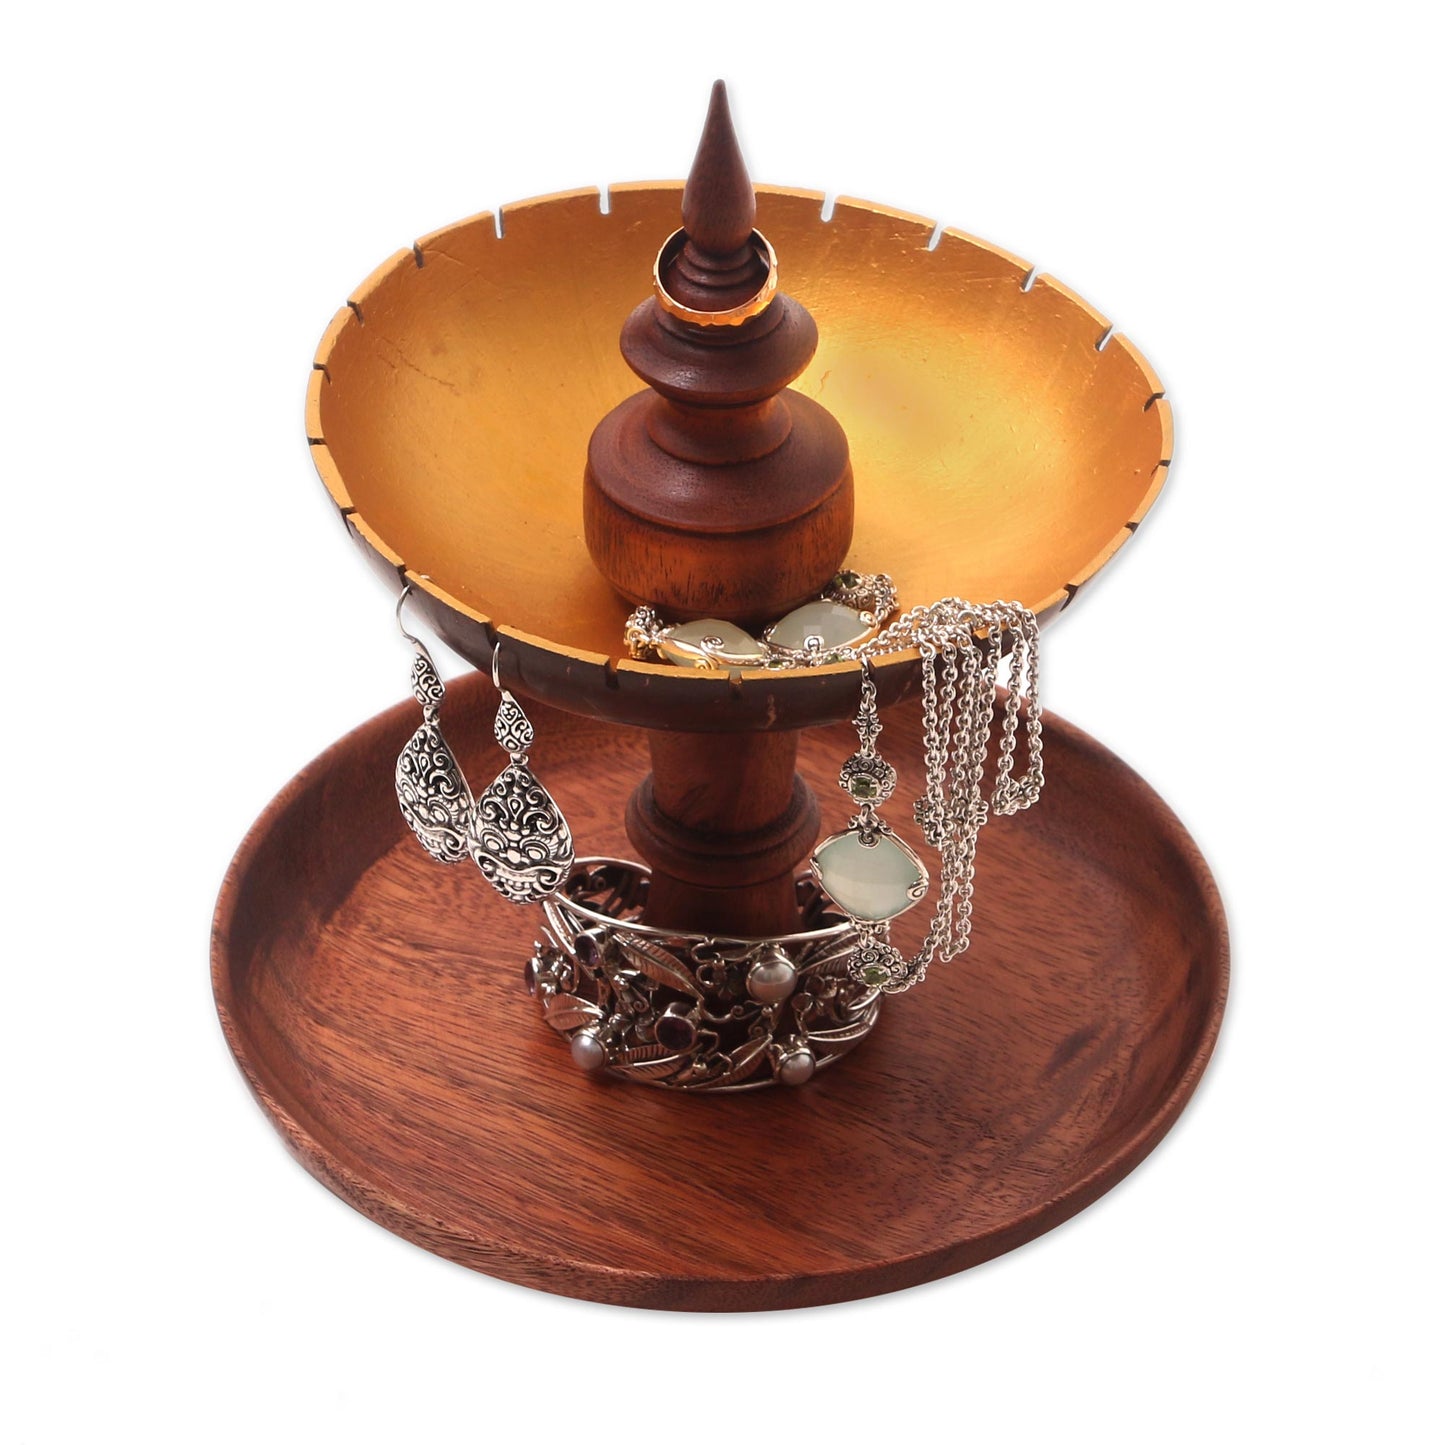 Golden Fountain Suar Wood and Coconut Shell Jewelry Stand from Bali